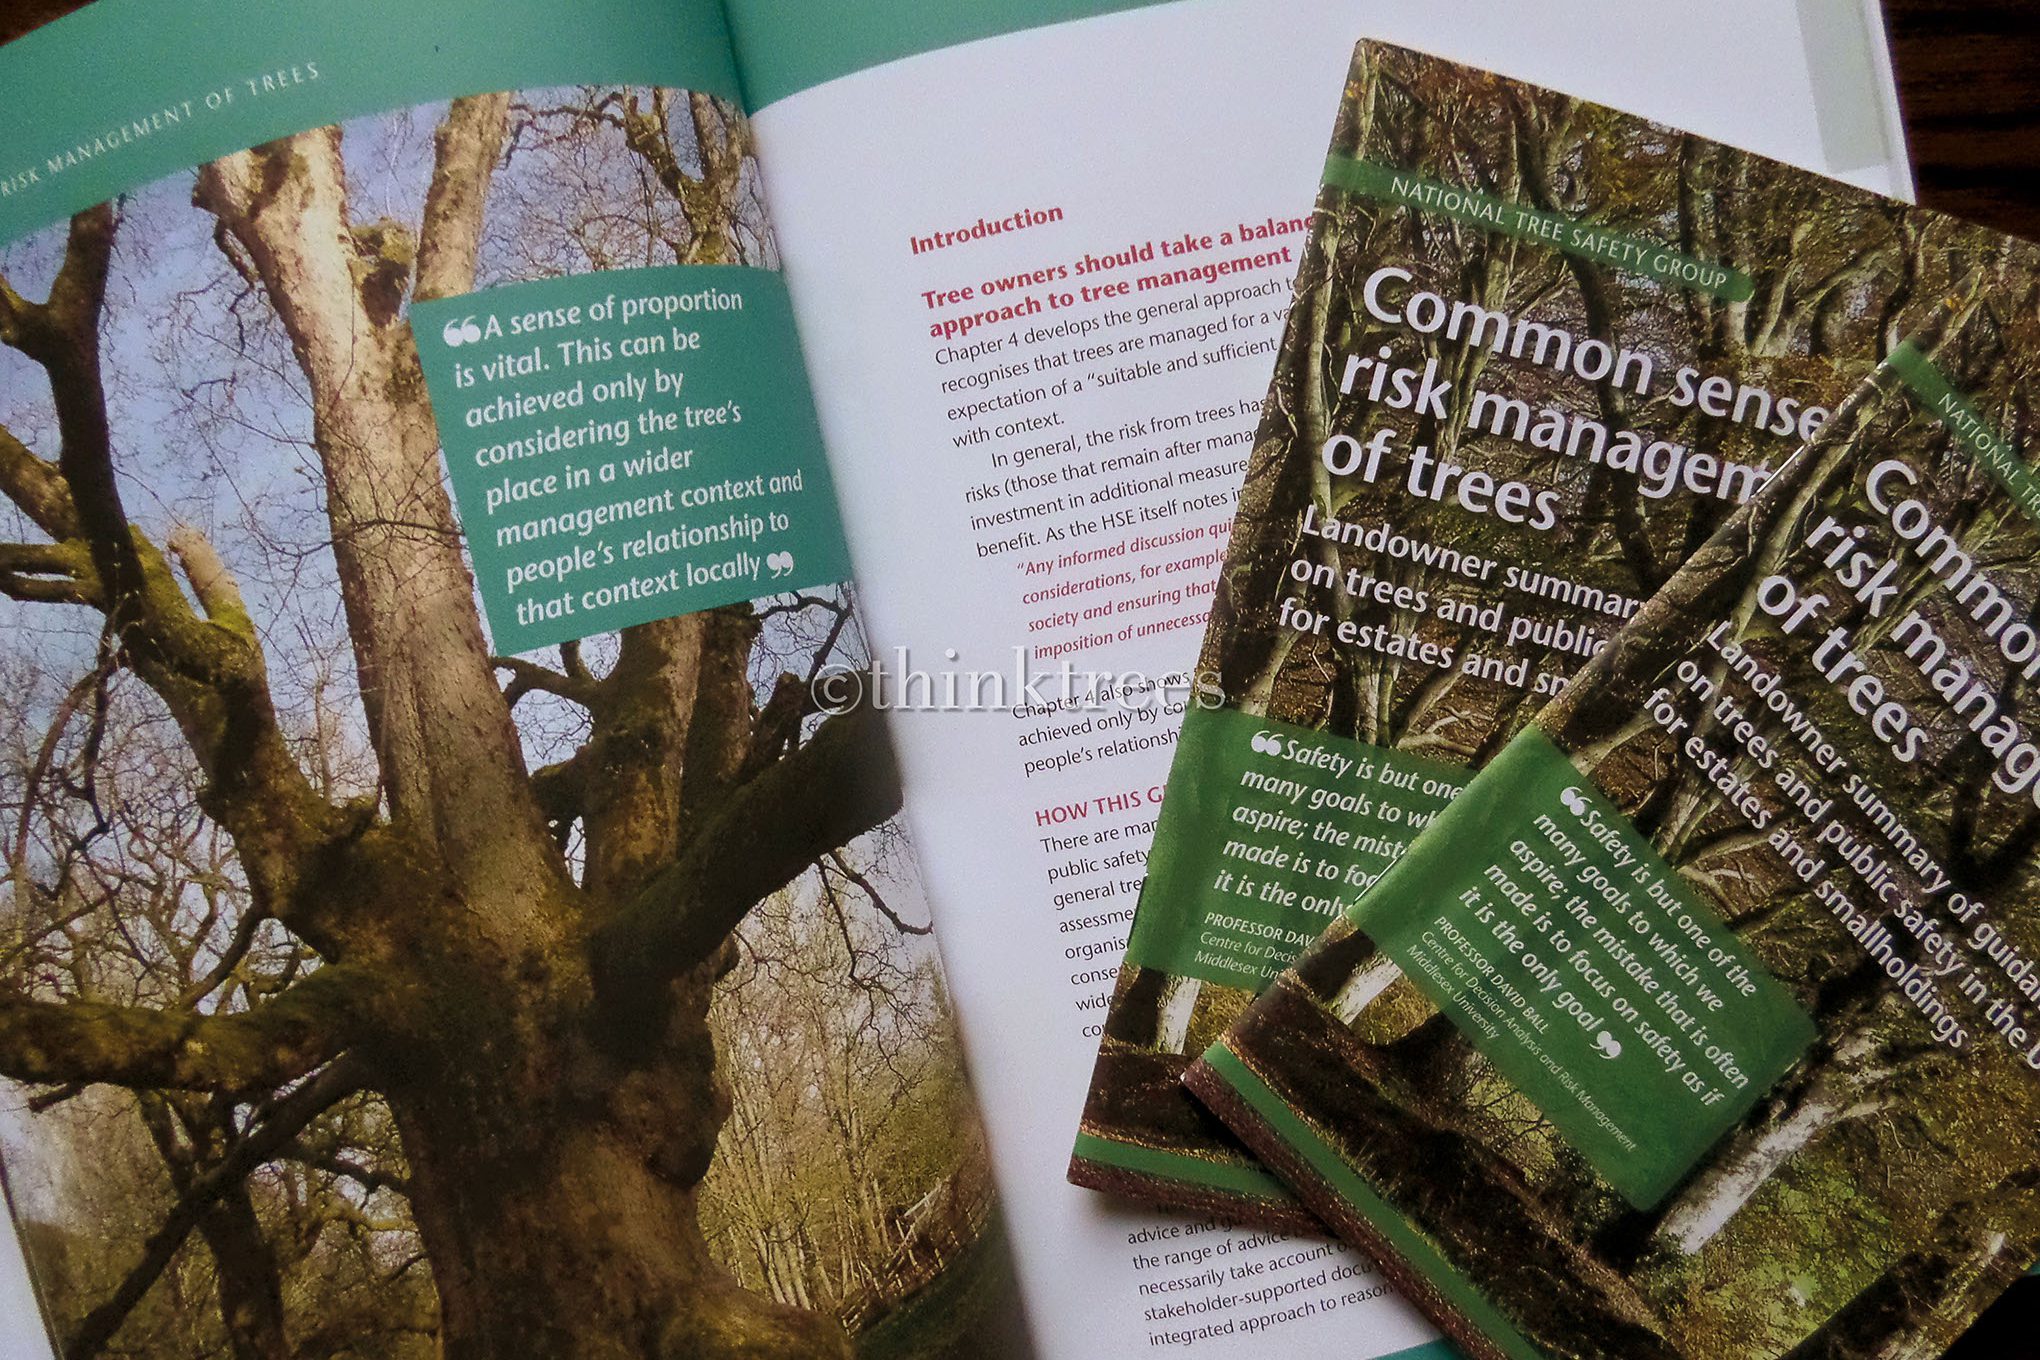 New Guidance On The Management Of Tree Risk Published By The NTSG